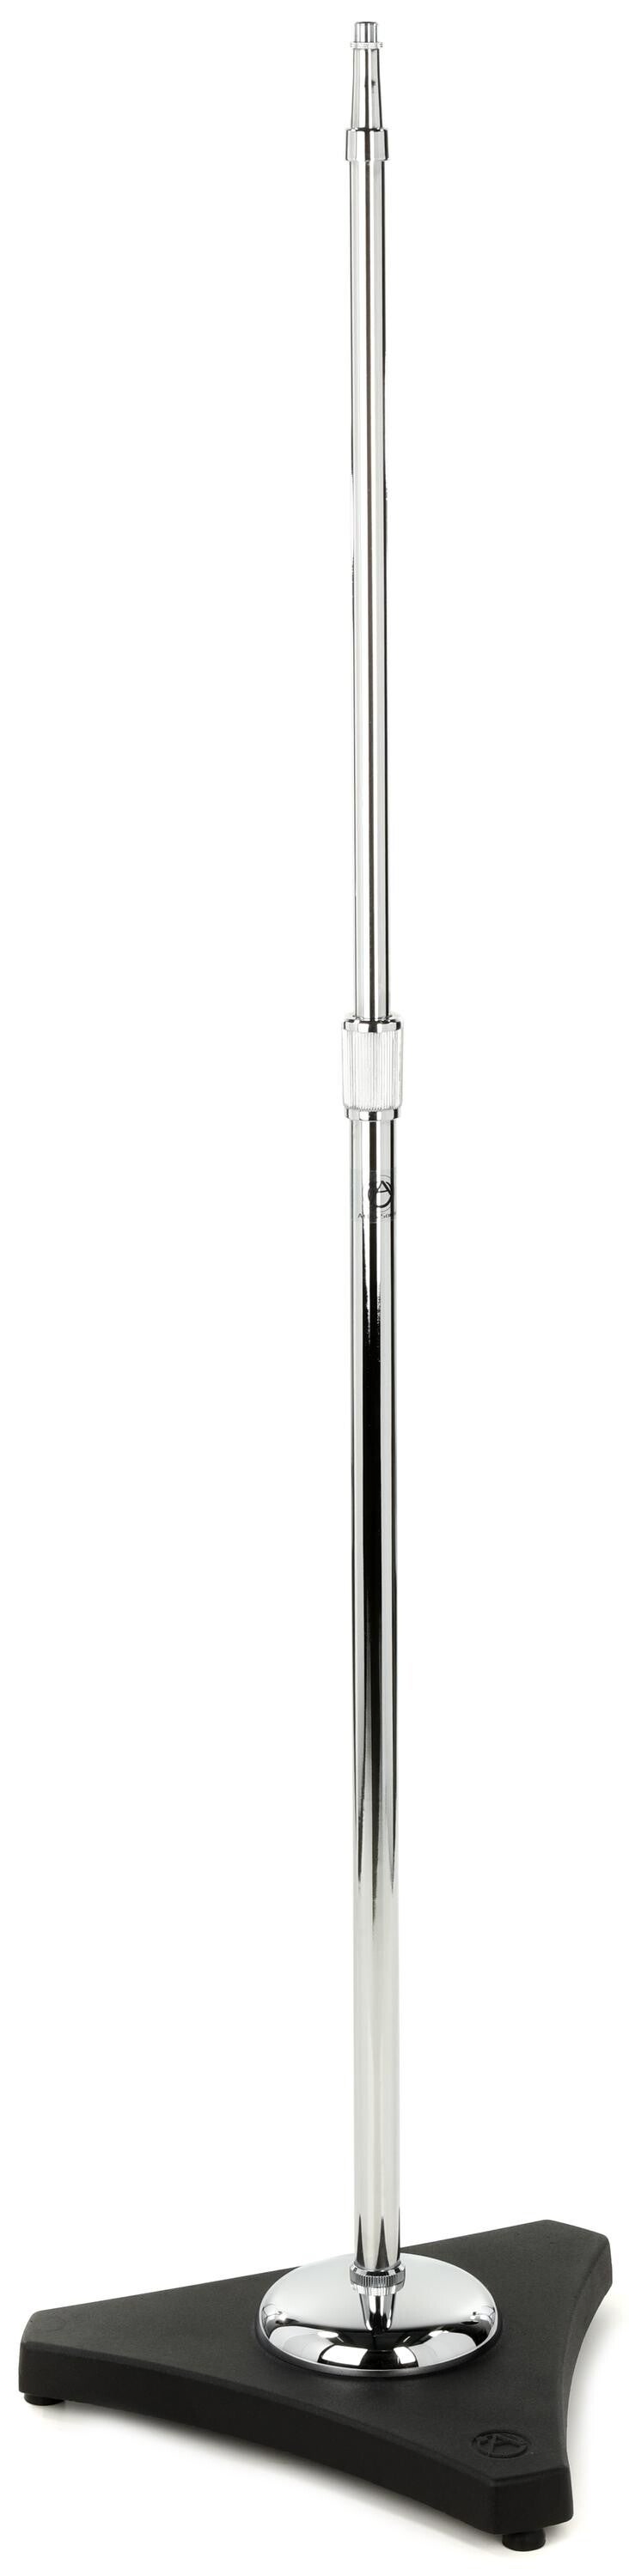 AtlasIED MS25 Air Suspension Professional Mic Stand - Chrome